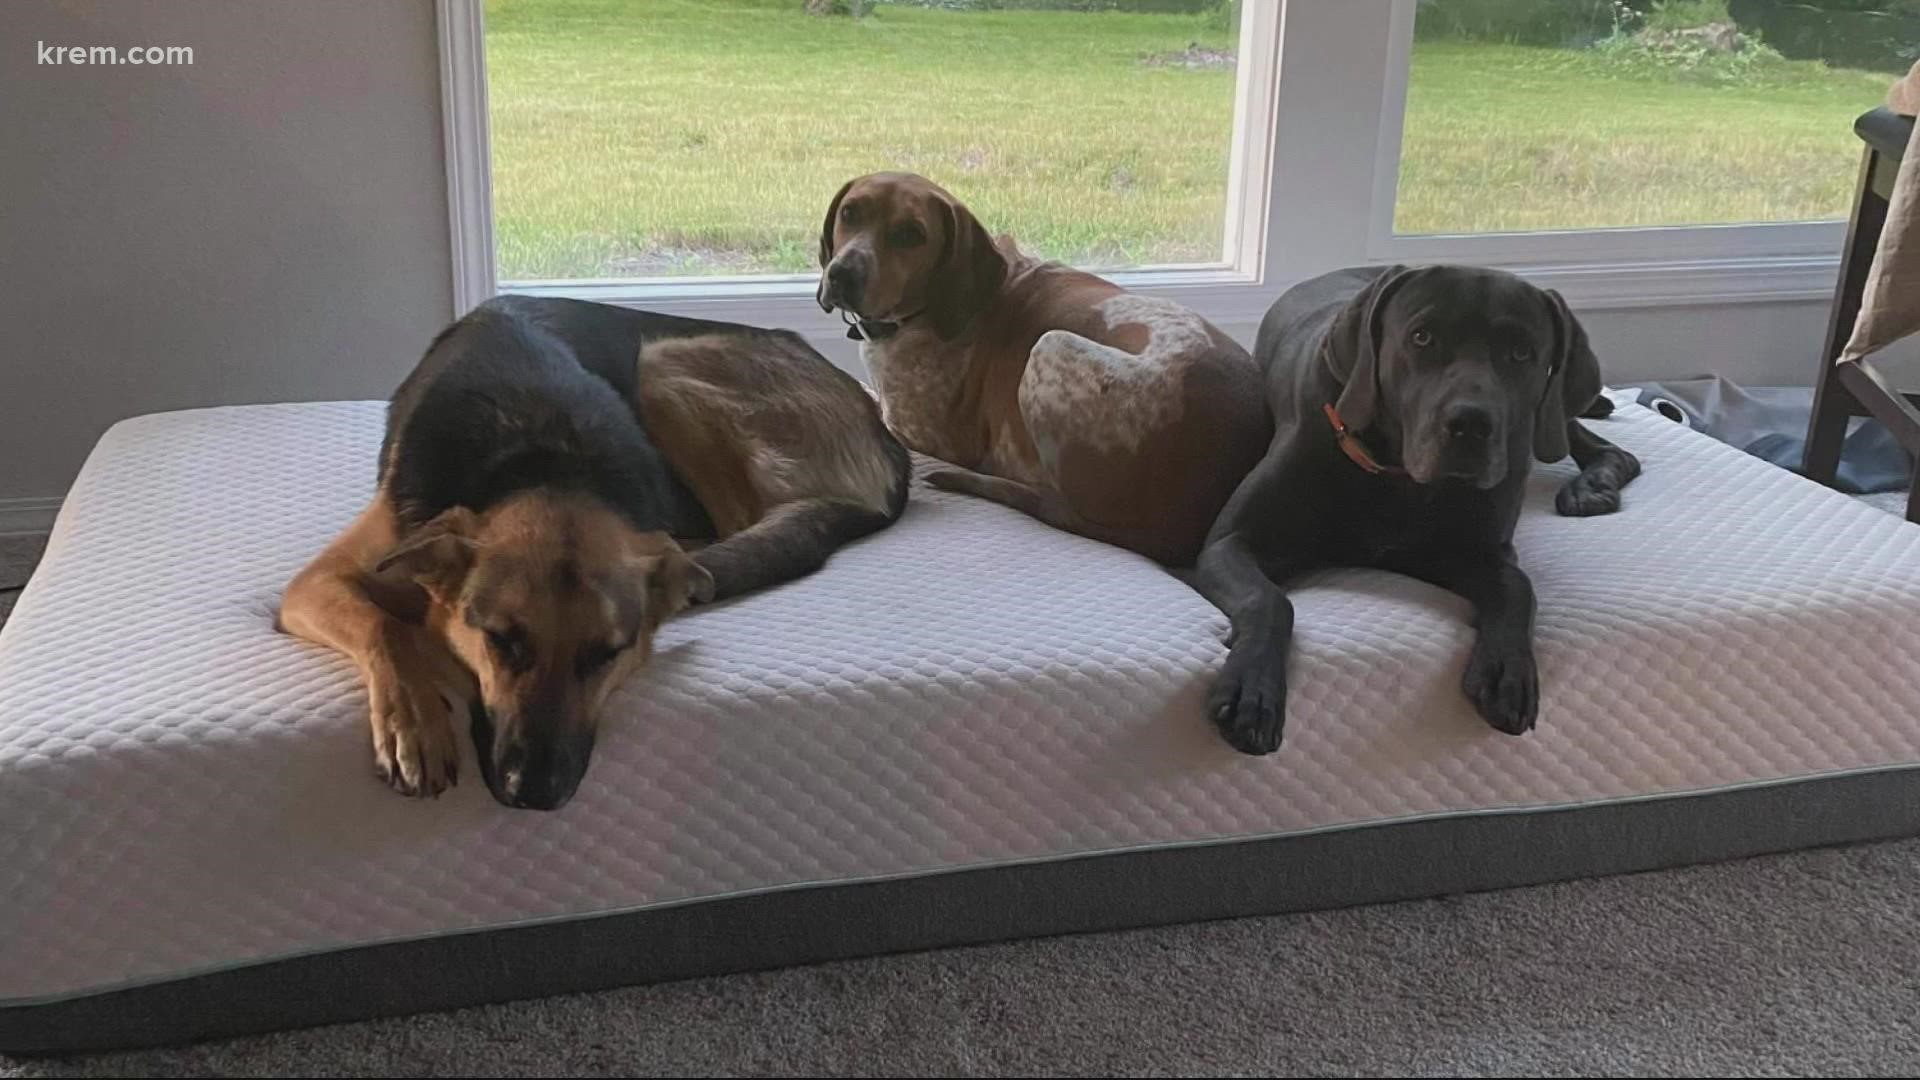 All three dogs died less than an hour after swimming in the river.